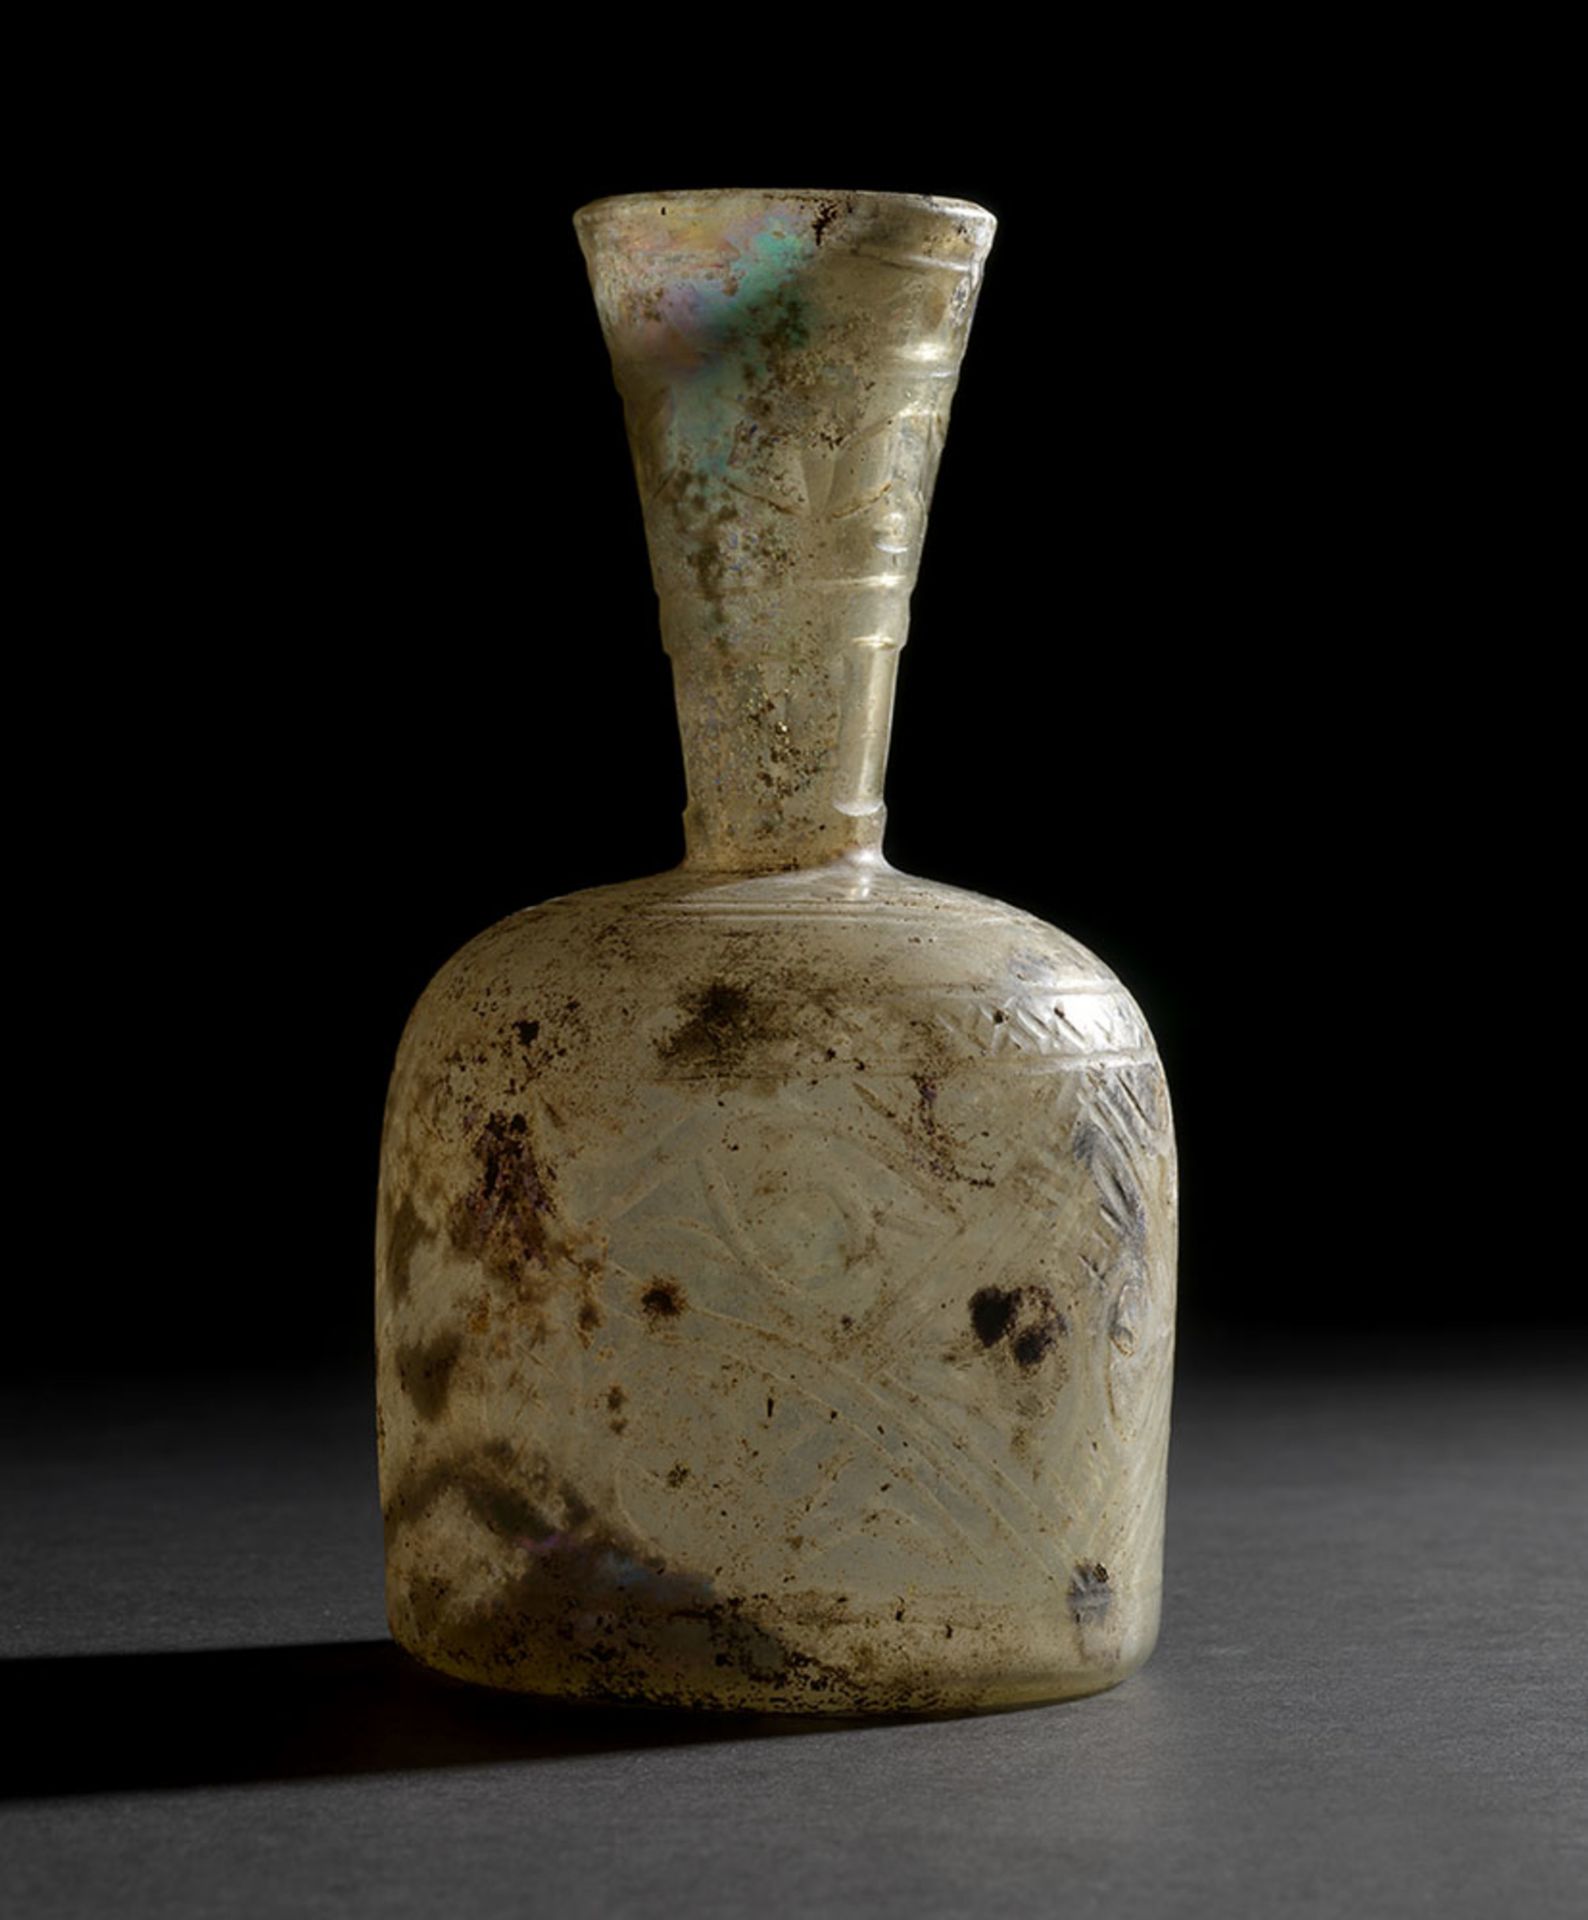 A LARGE WHEEL-CUT CLEAR GLASS FLASK, PERSIA, 9TH-10TH CENTURY - Image 2 of 7